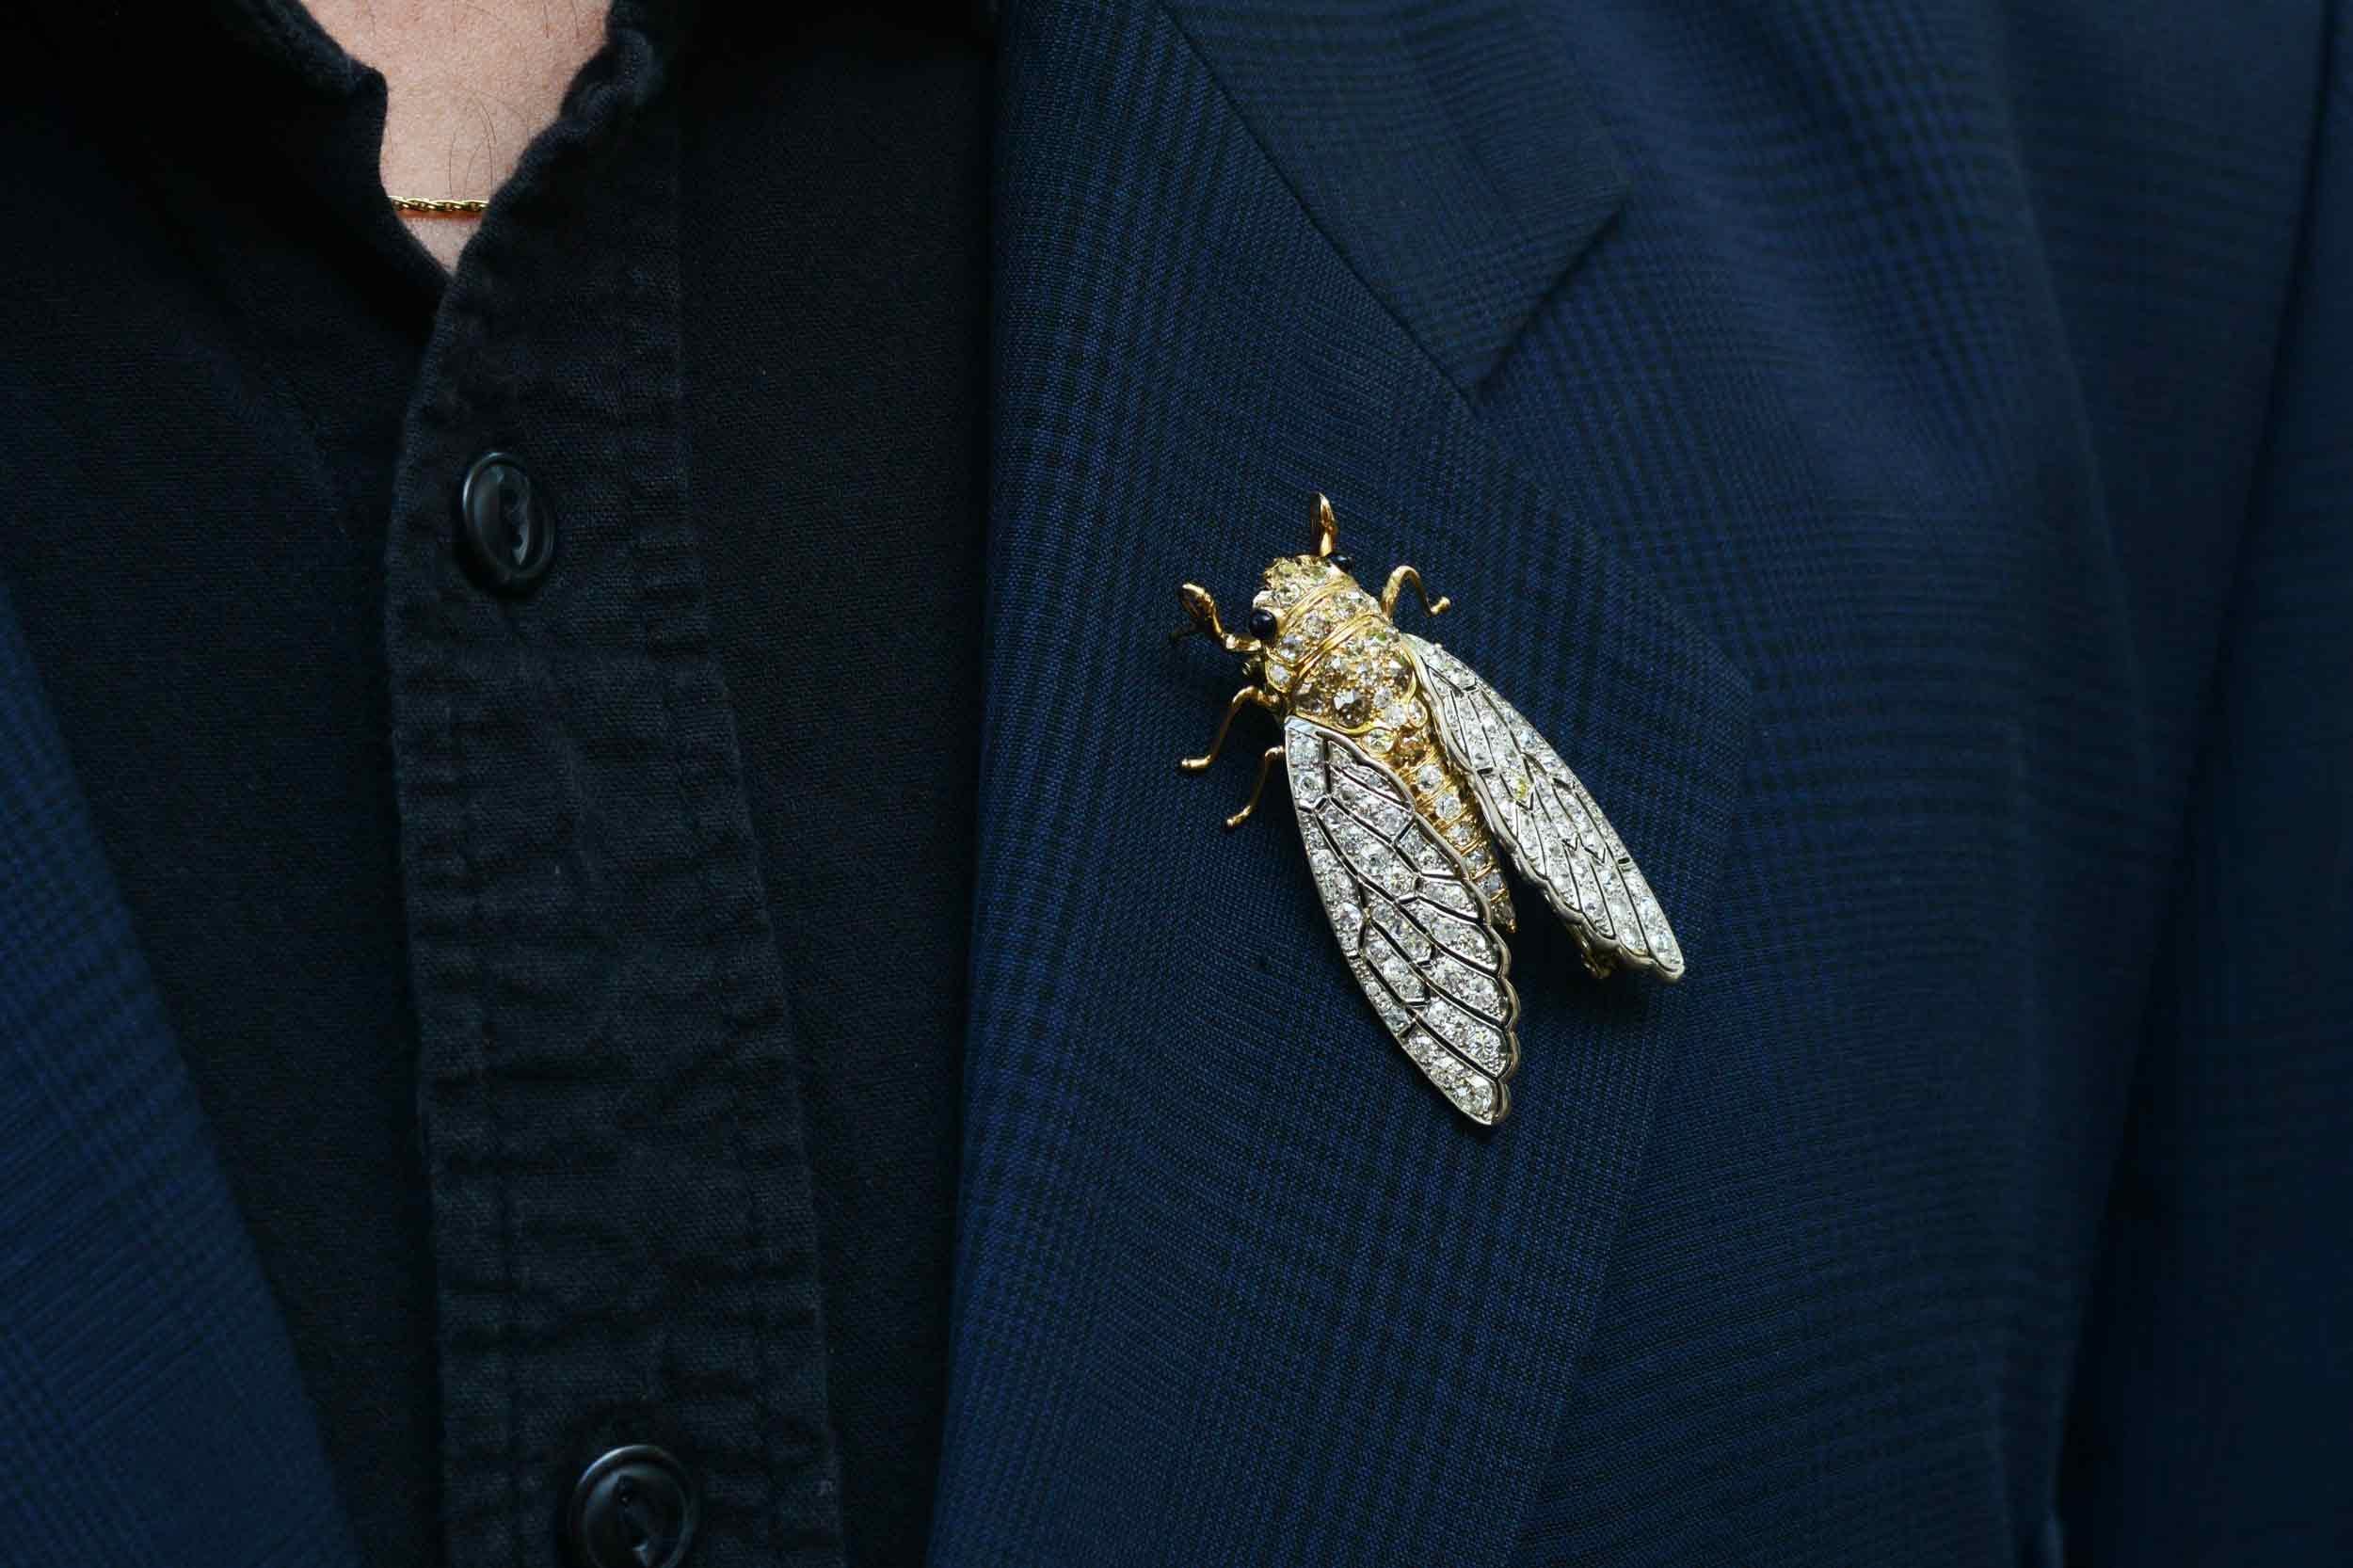 Victorian Interesting Insect Cicada Diamond Brooch Pin For Sale